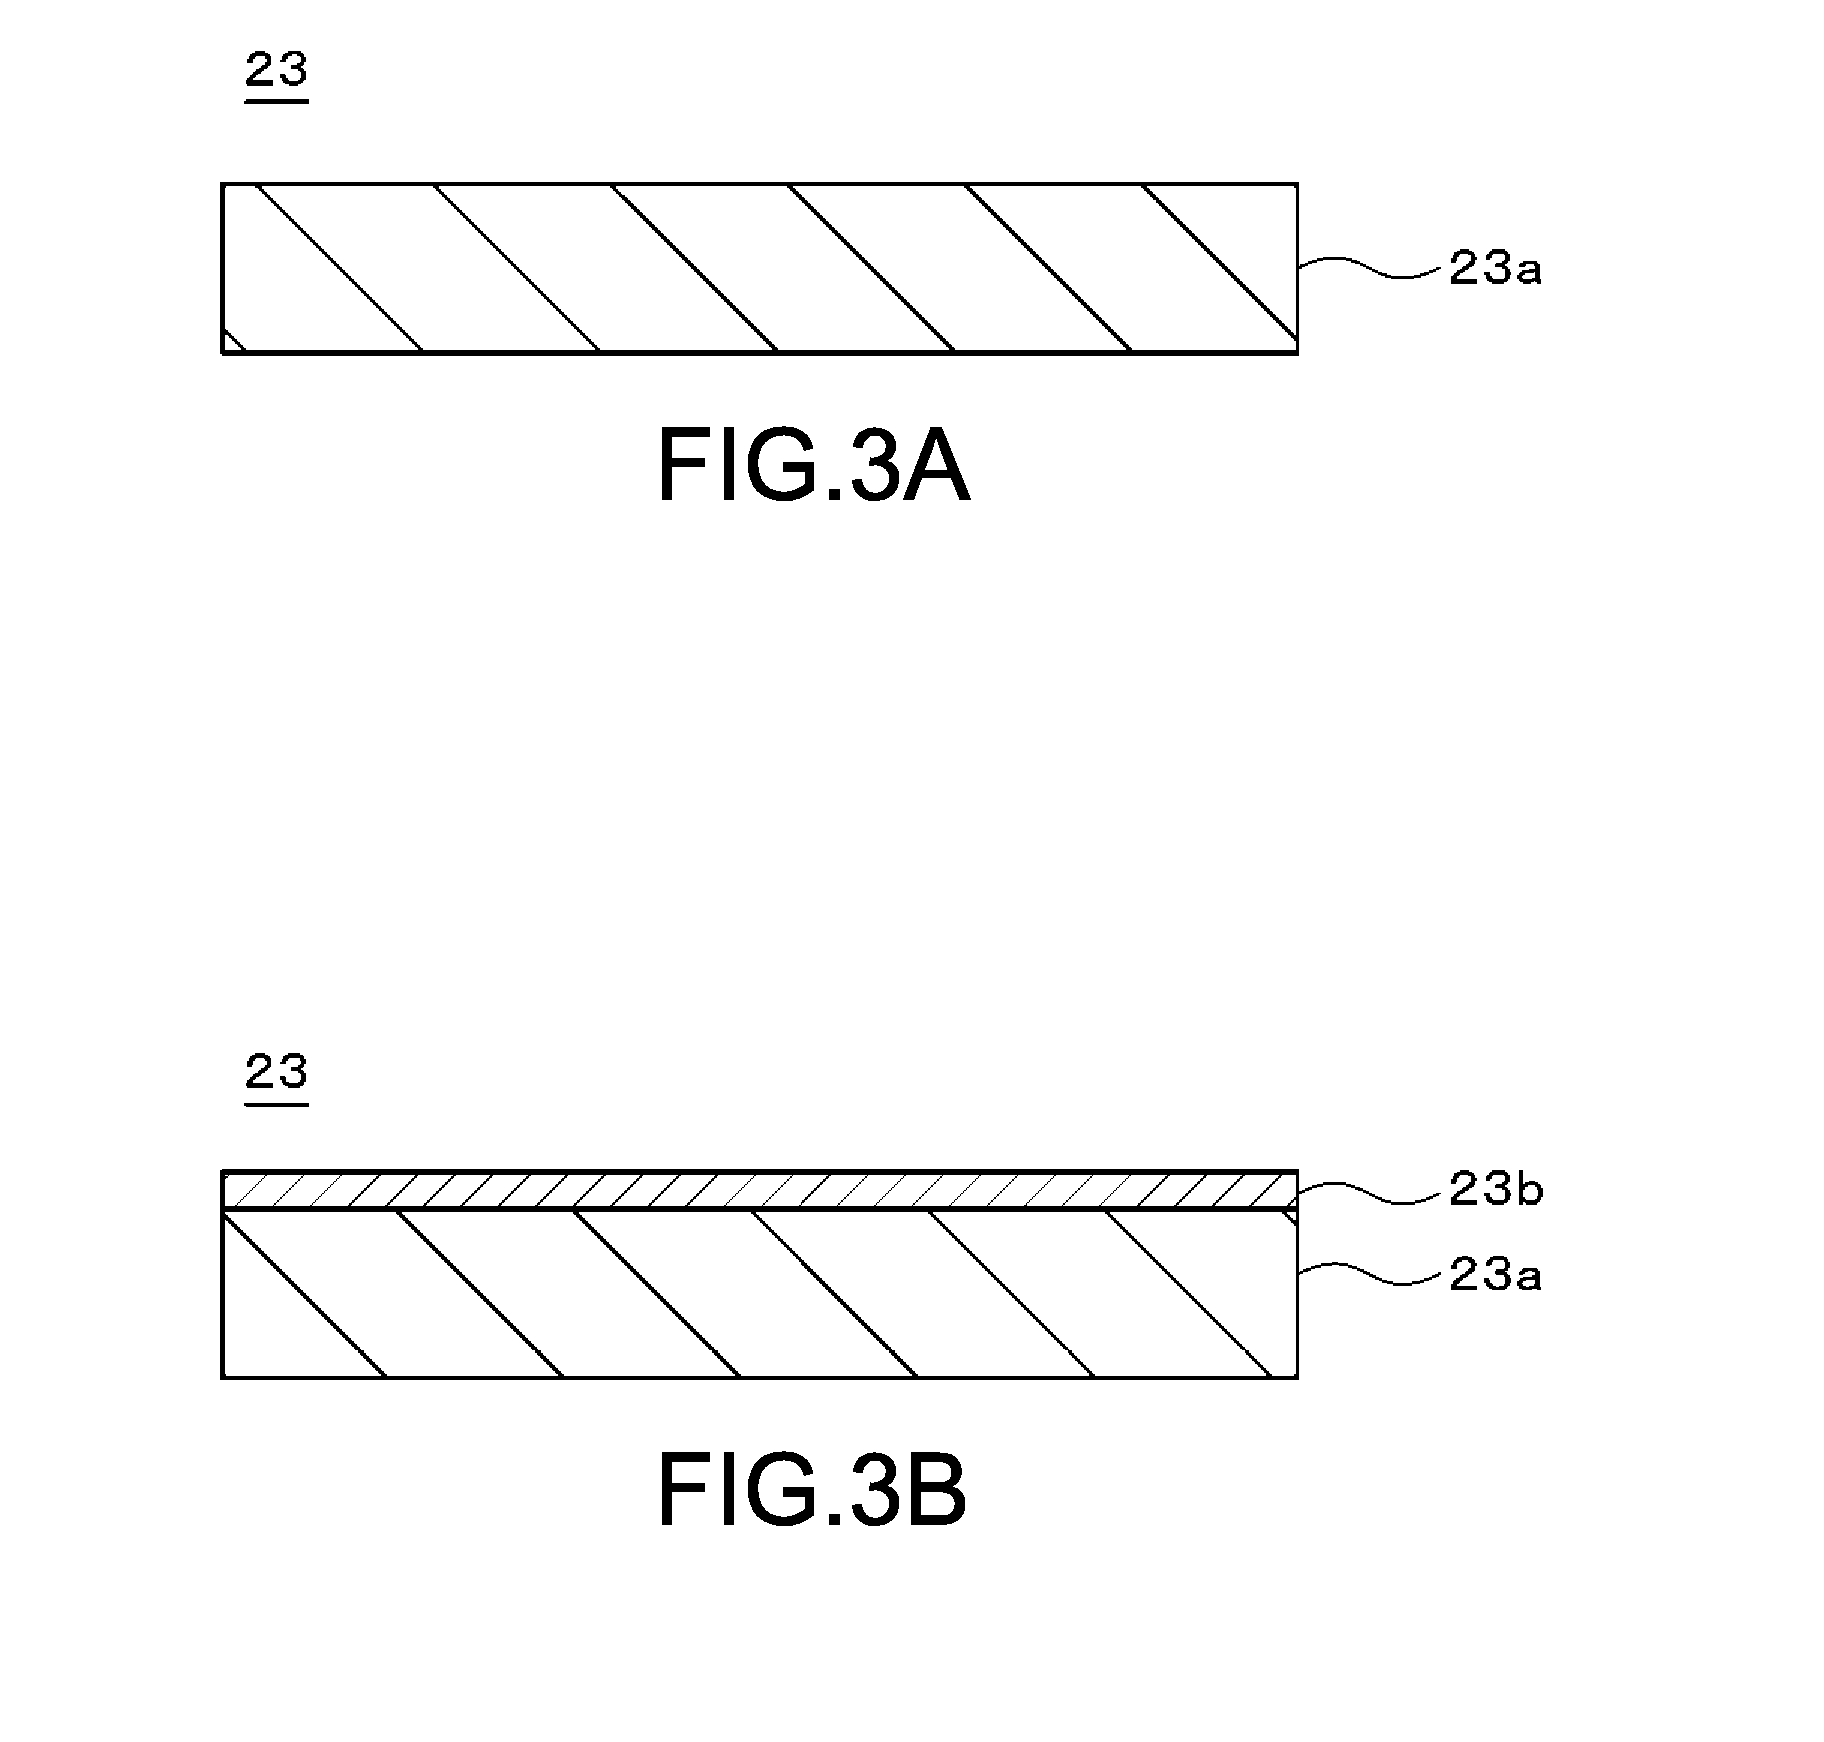 Battery, battery pack, electronic apparatus, electric vehicle, electrical storage apparatus and electricity system